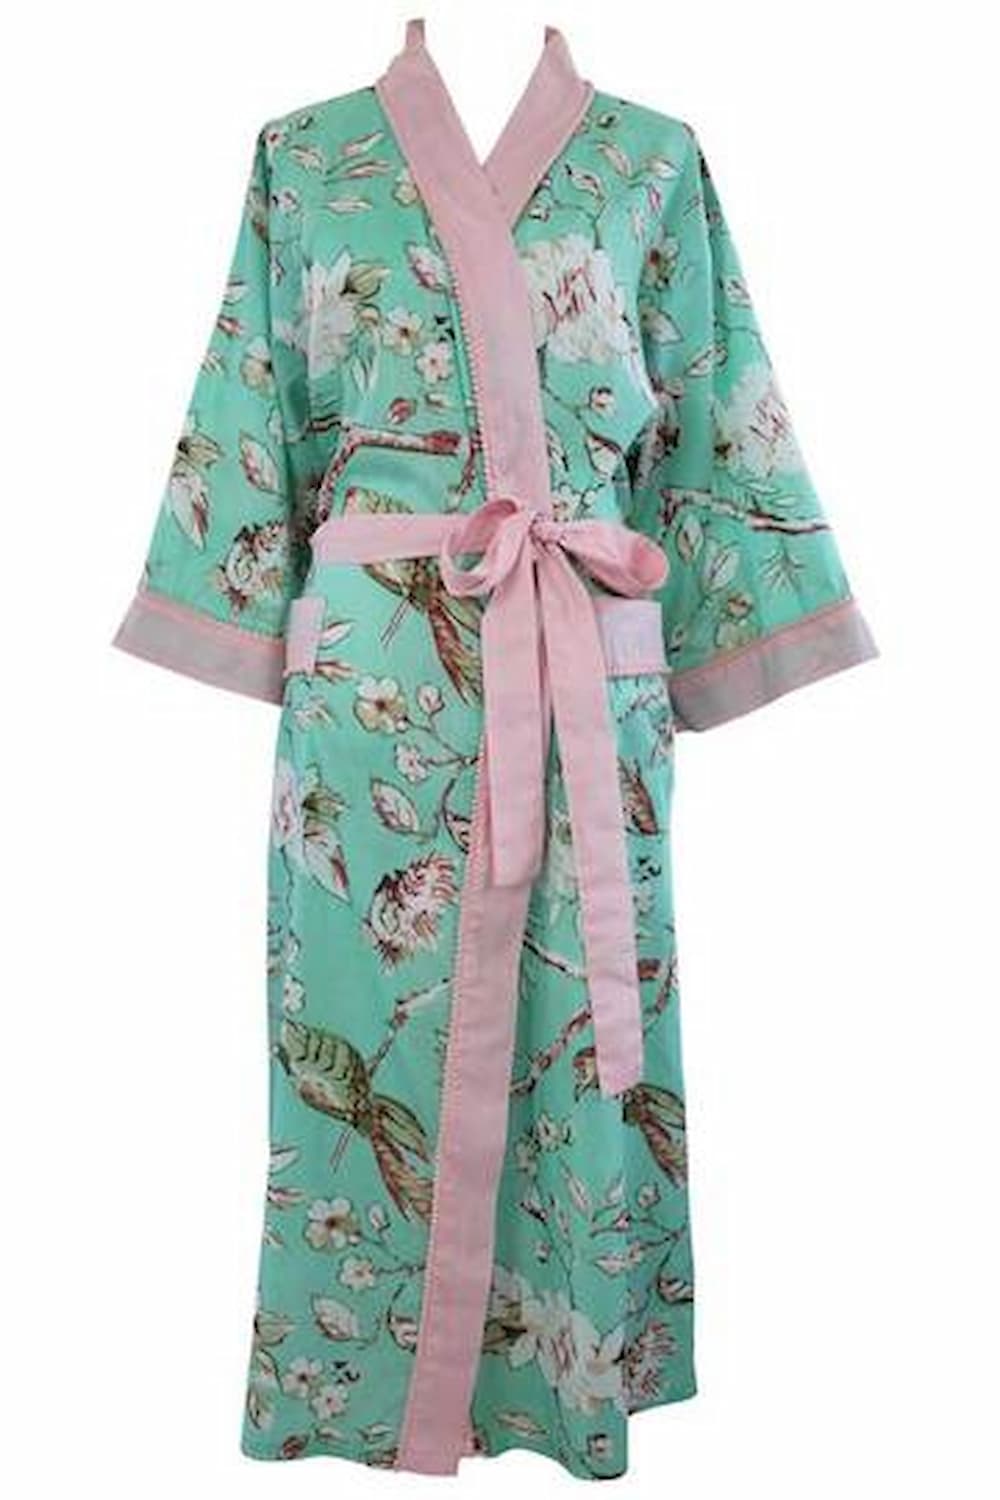 Mint Blossom Floral Dressing Gown for sale - Woodcock and Cavendish